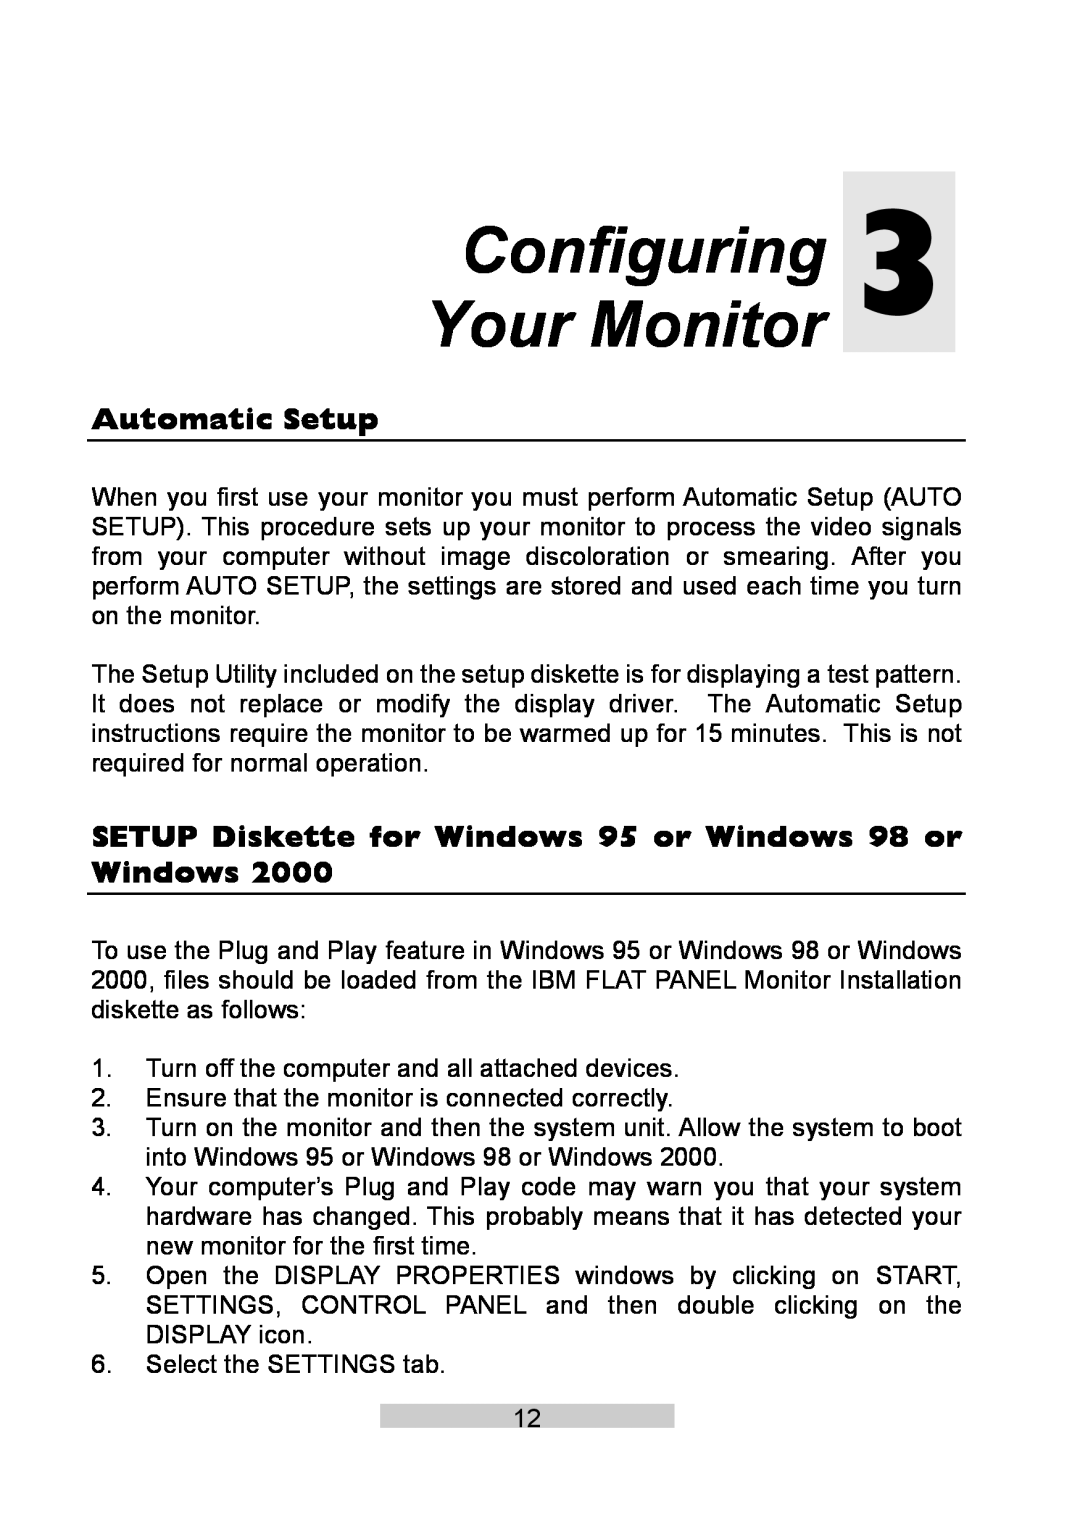 IBM T86A system manual Configuring Your Monitor, Automatic Setup, SETUP Diskette for Windows 95 or Windows 98 or Windows 